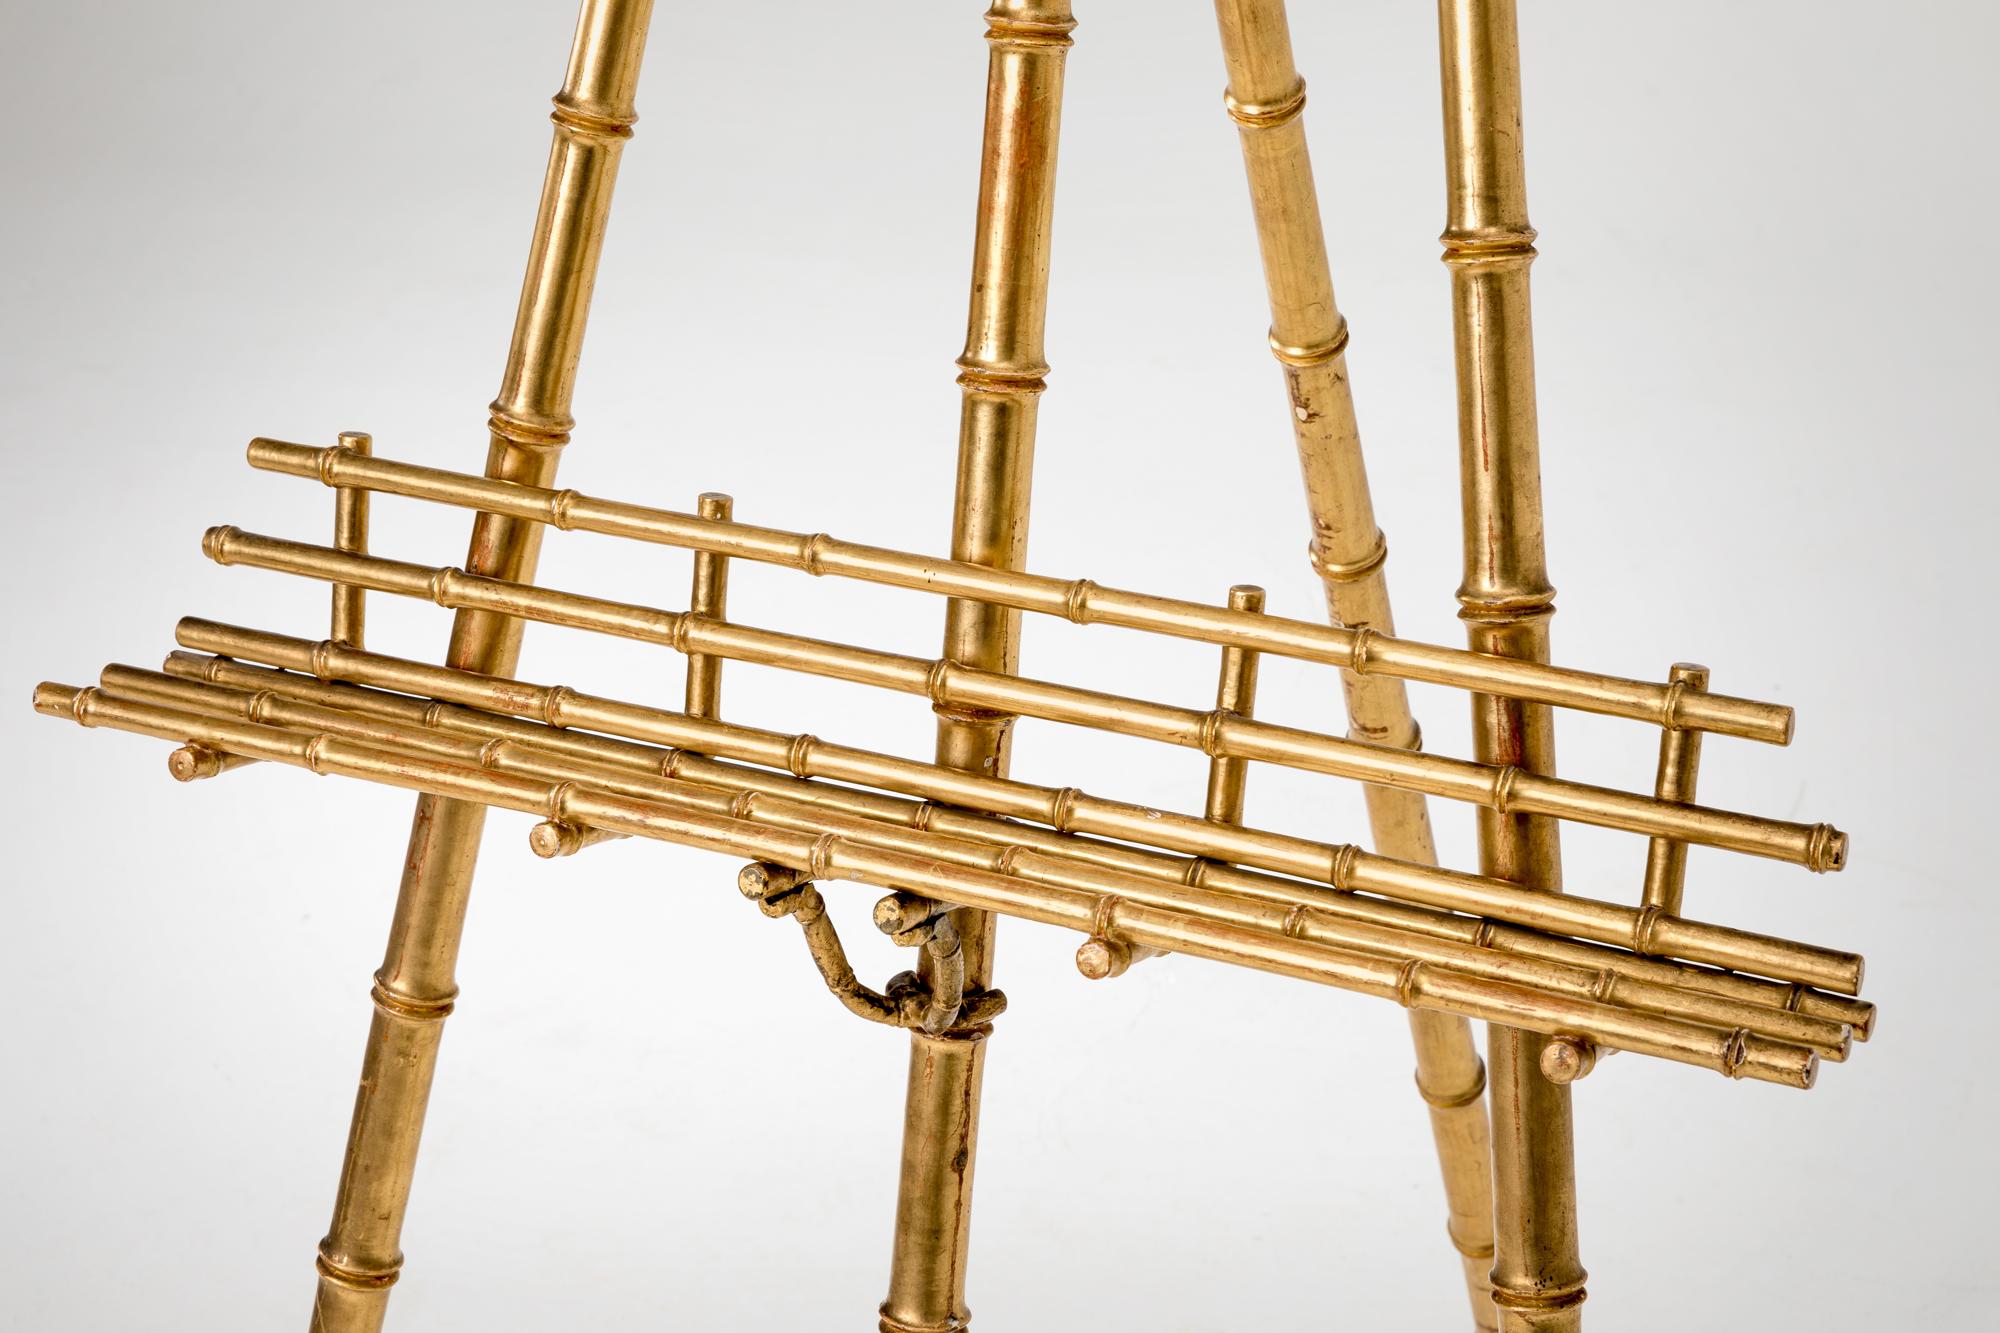 Easel in carved and gilded wood simulating «faux bamboo» cane
England, 19th century

An easel in gilded wood with false bamboo of the 19th century is a decorative or functional object that presents an elegant and exotic appearance. The 